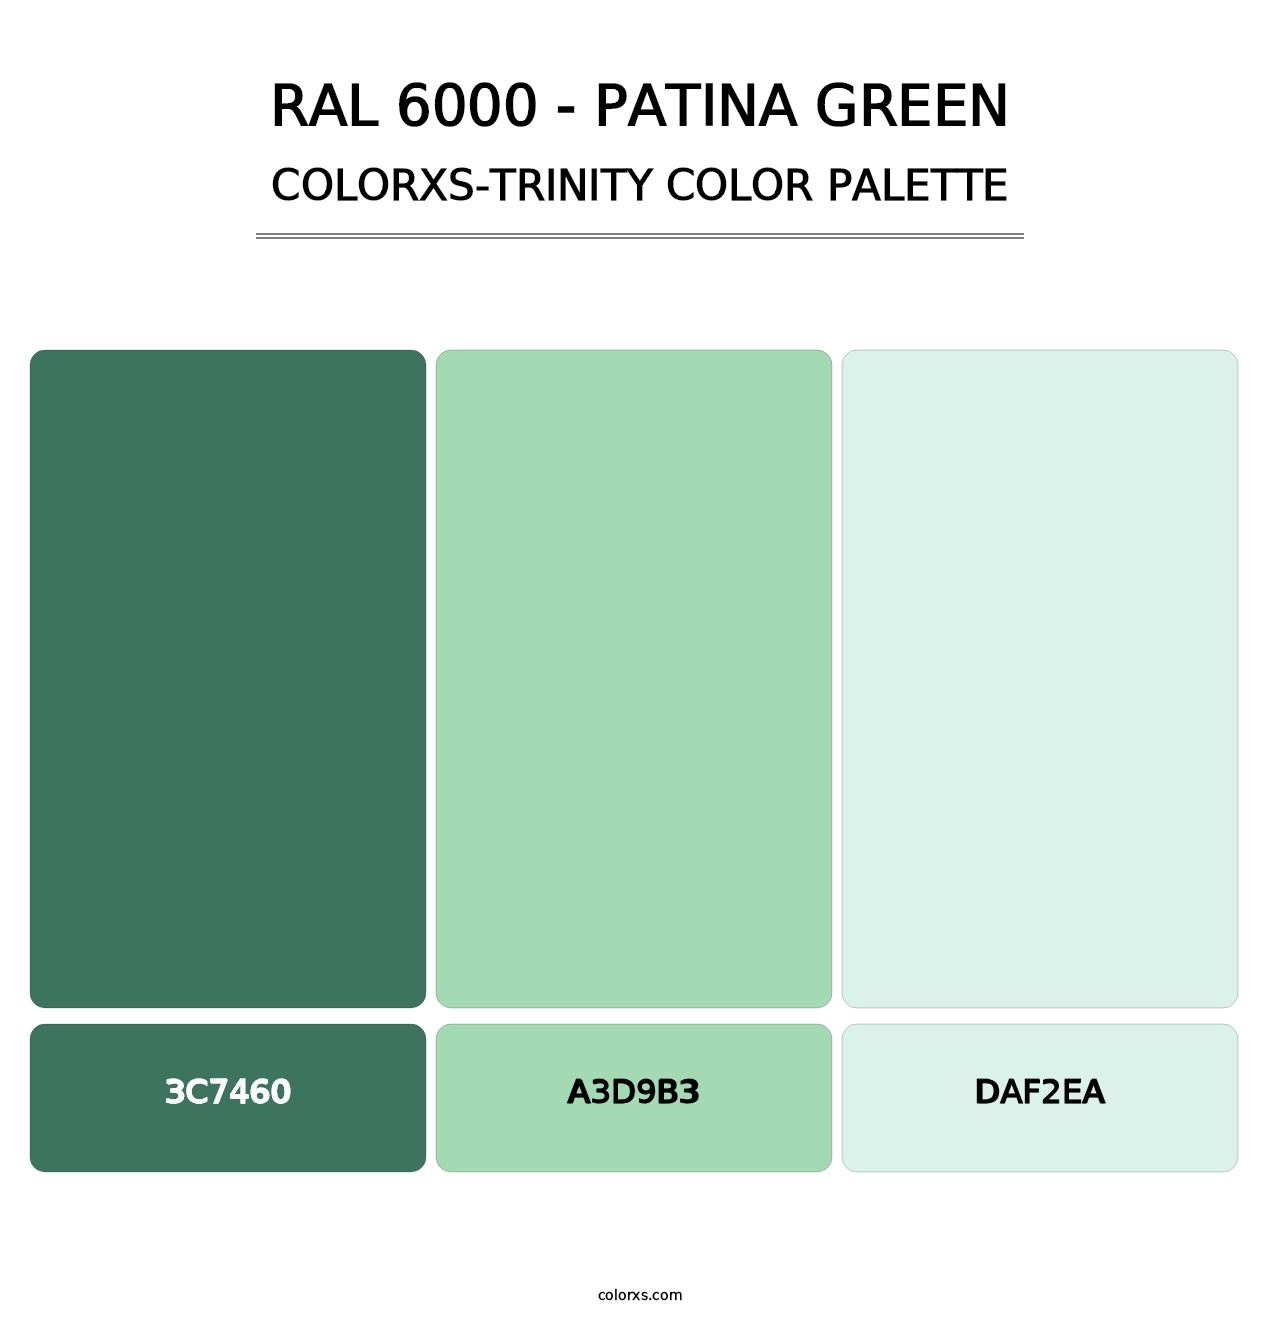 RAL 6000 - Patina Green - Colorxs Trinity Palette